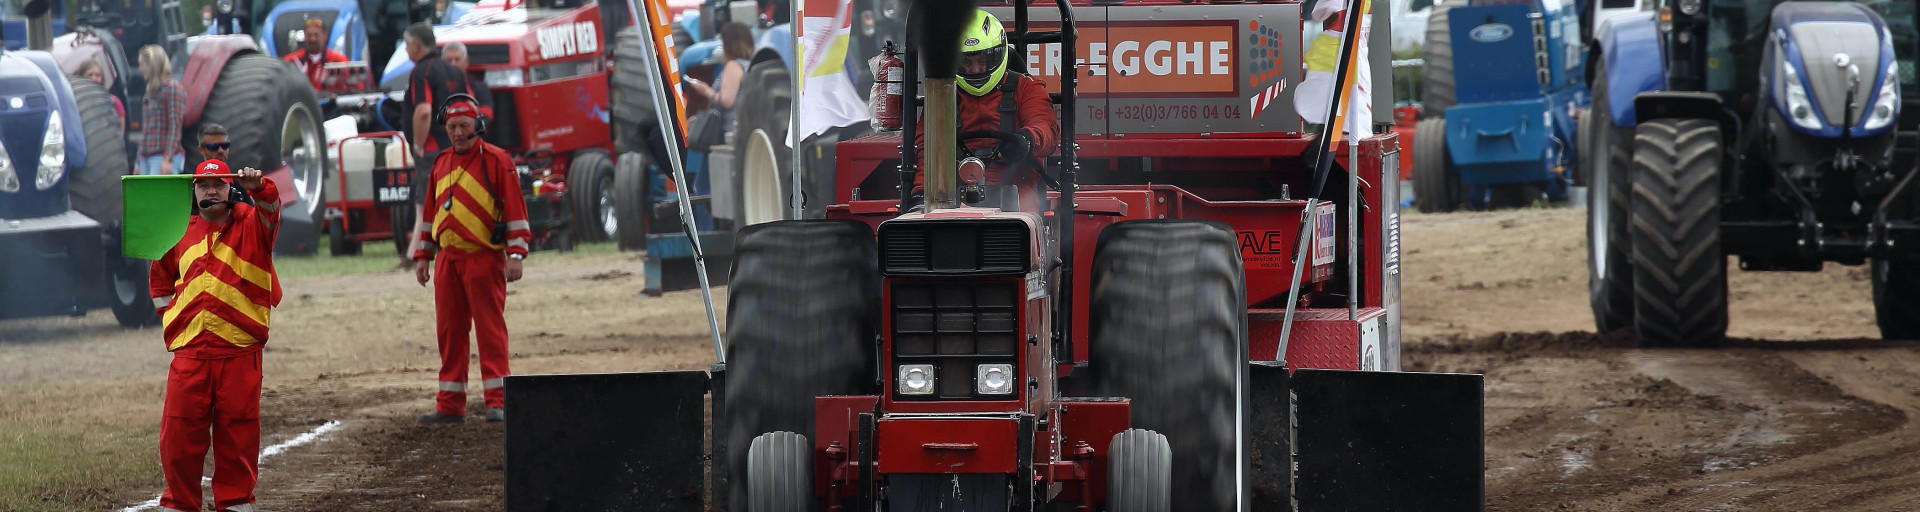 Tractor Pulling Events